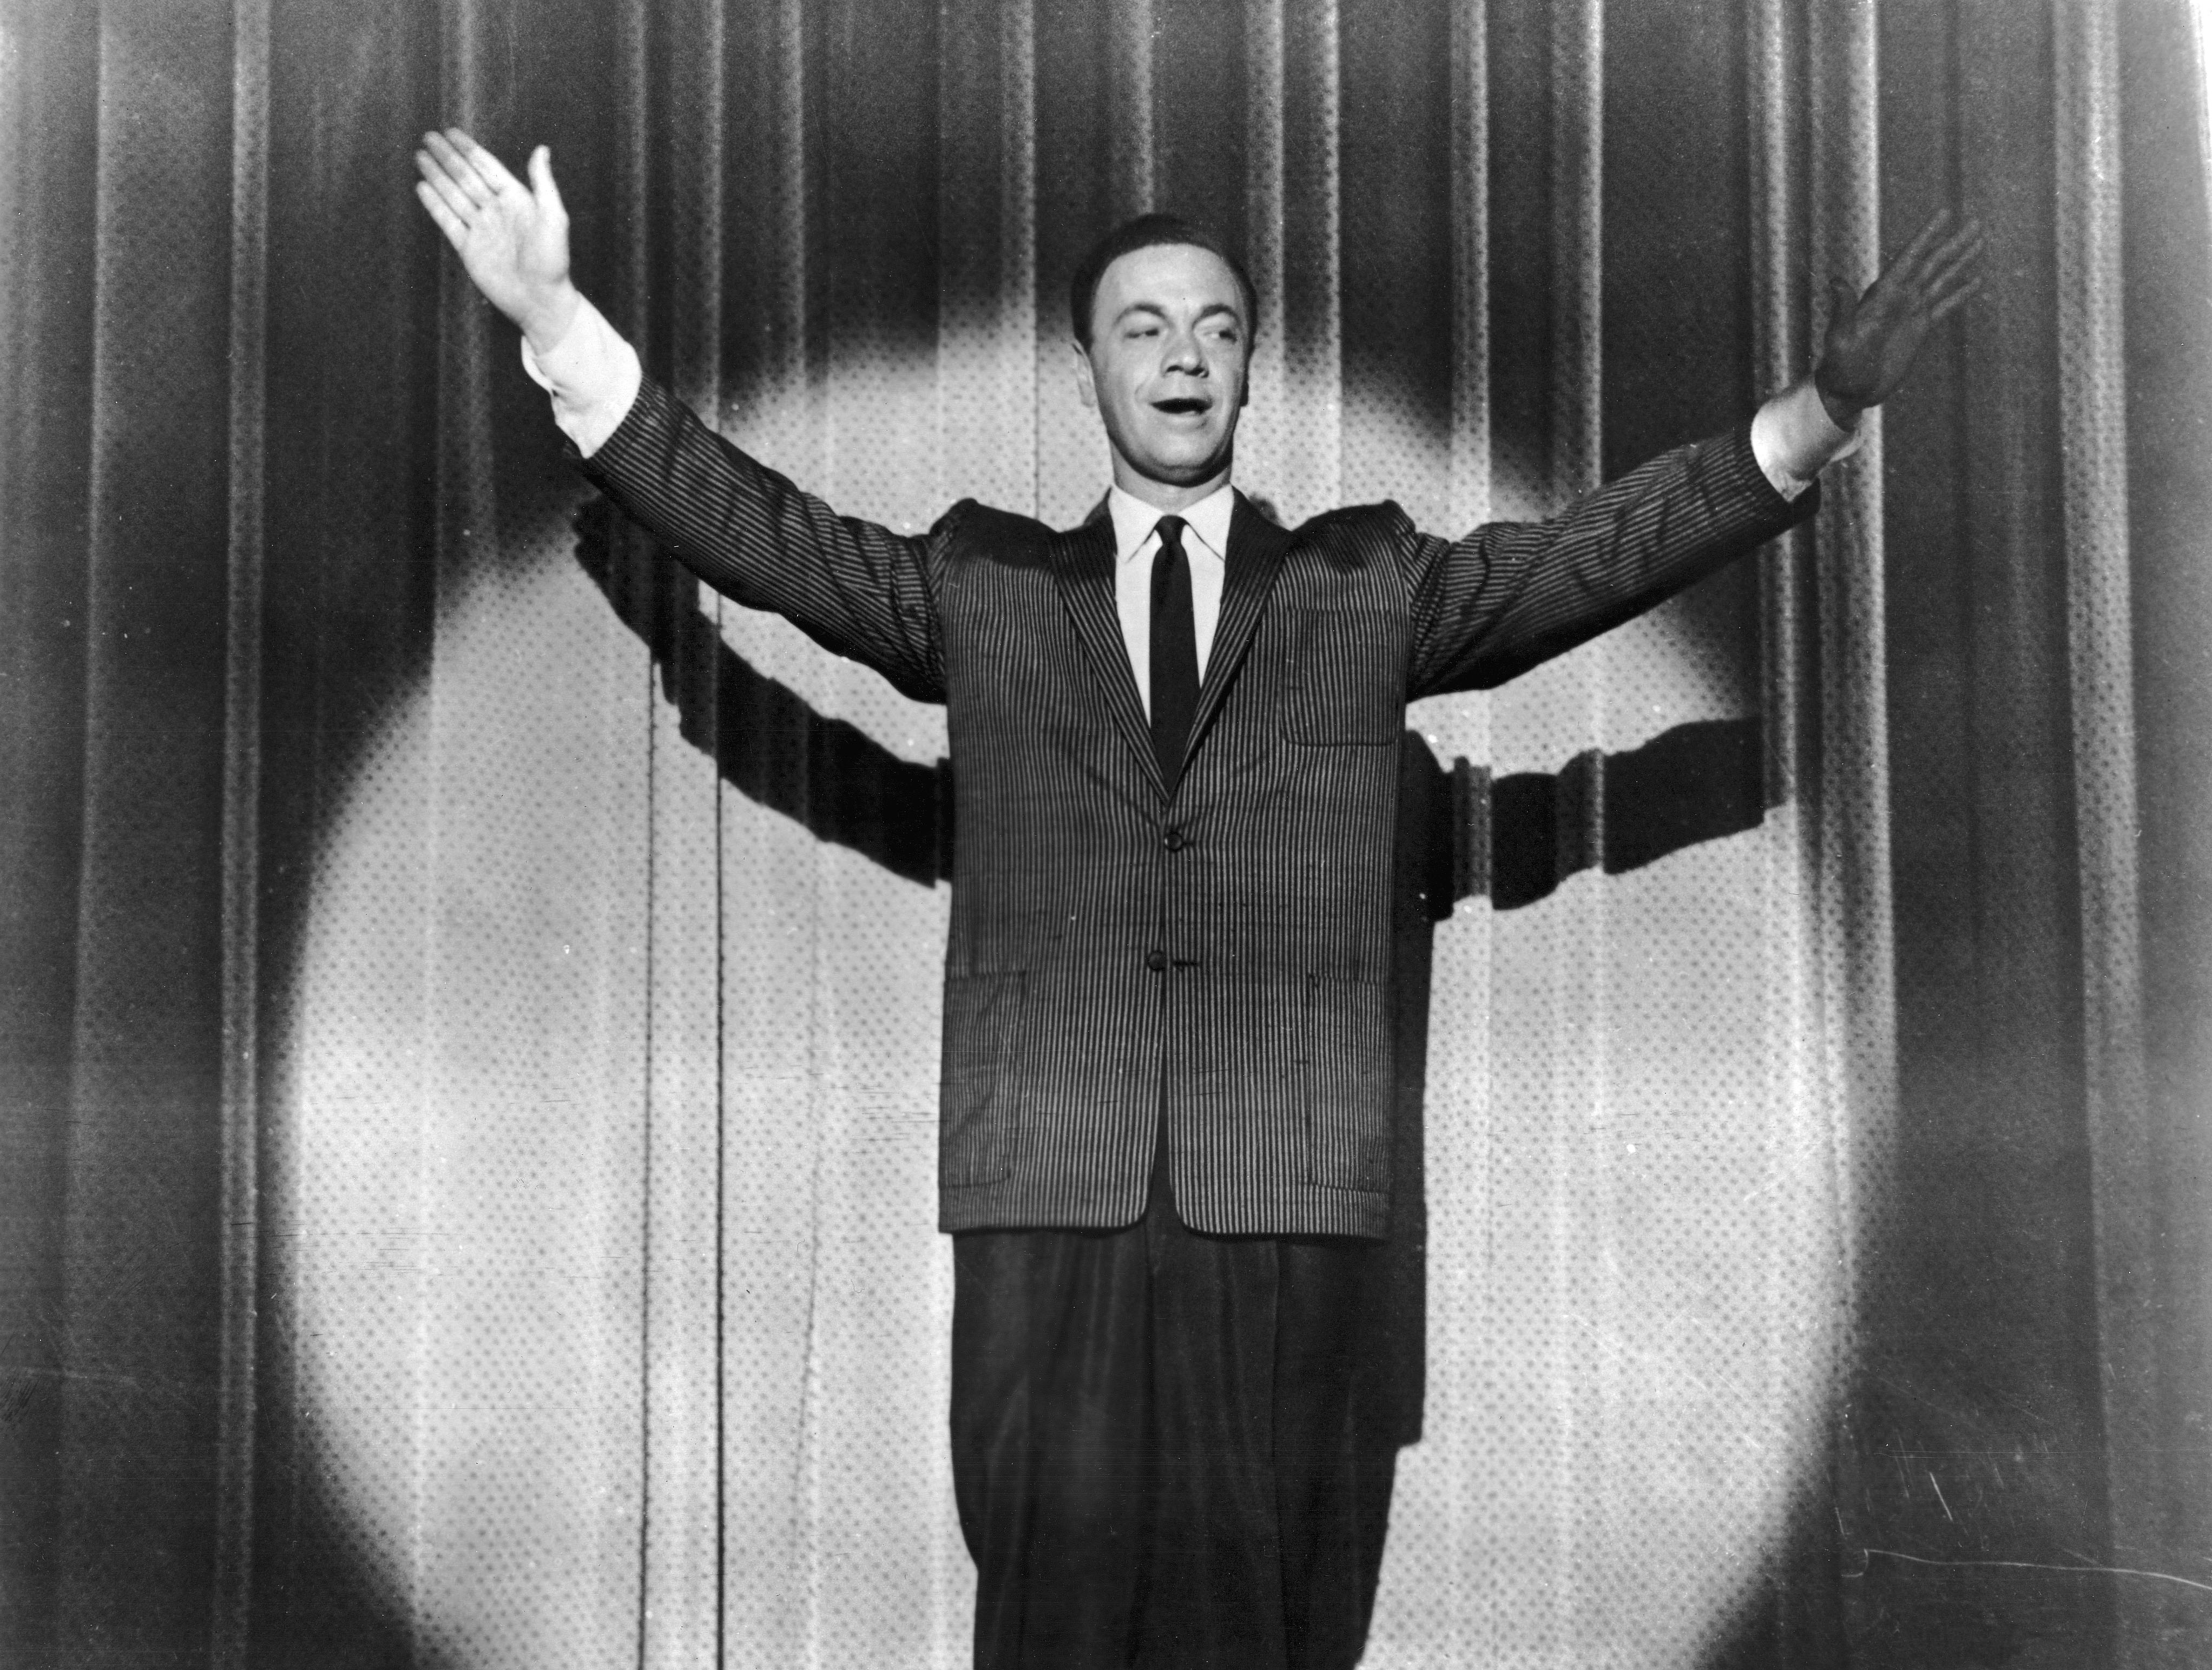 American disc jockey and rock 'n' roll promoter Alan Freed plays himself in the film 'Go, Johnny, Go!', directed by Paul Landres in 1959. Freed's ashes will be removed from the Rock and Roll Hall of Fame and Museum in Cleveland, Ohio on Tuesday, August 5, 2014. (Archive Photos&mdash;Getty Images)